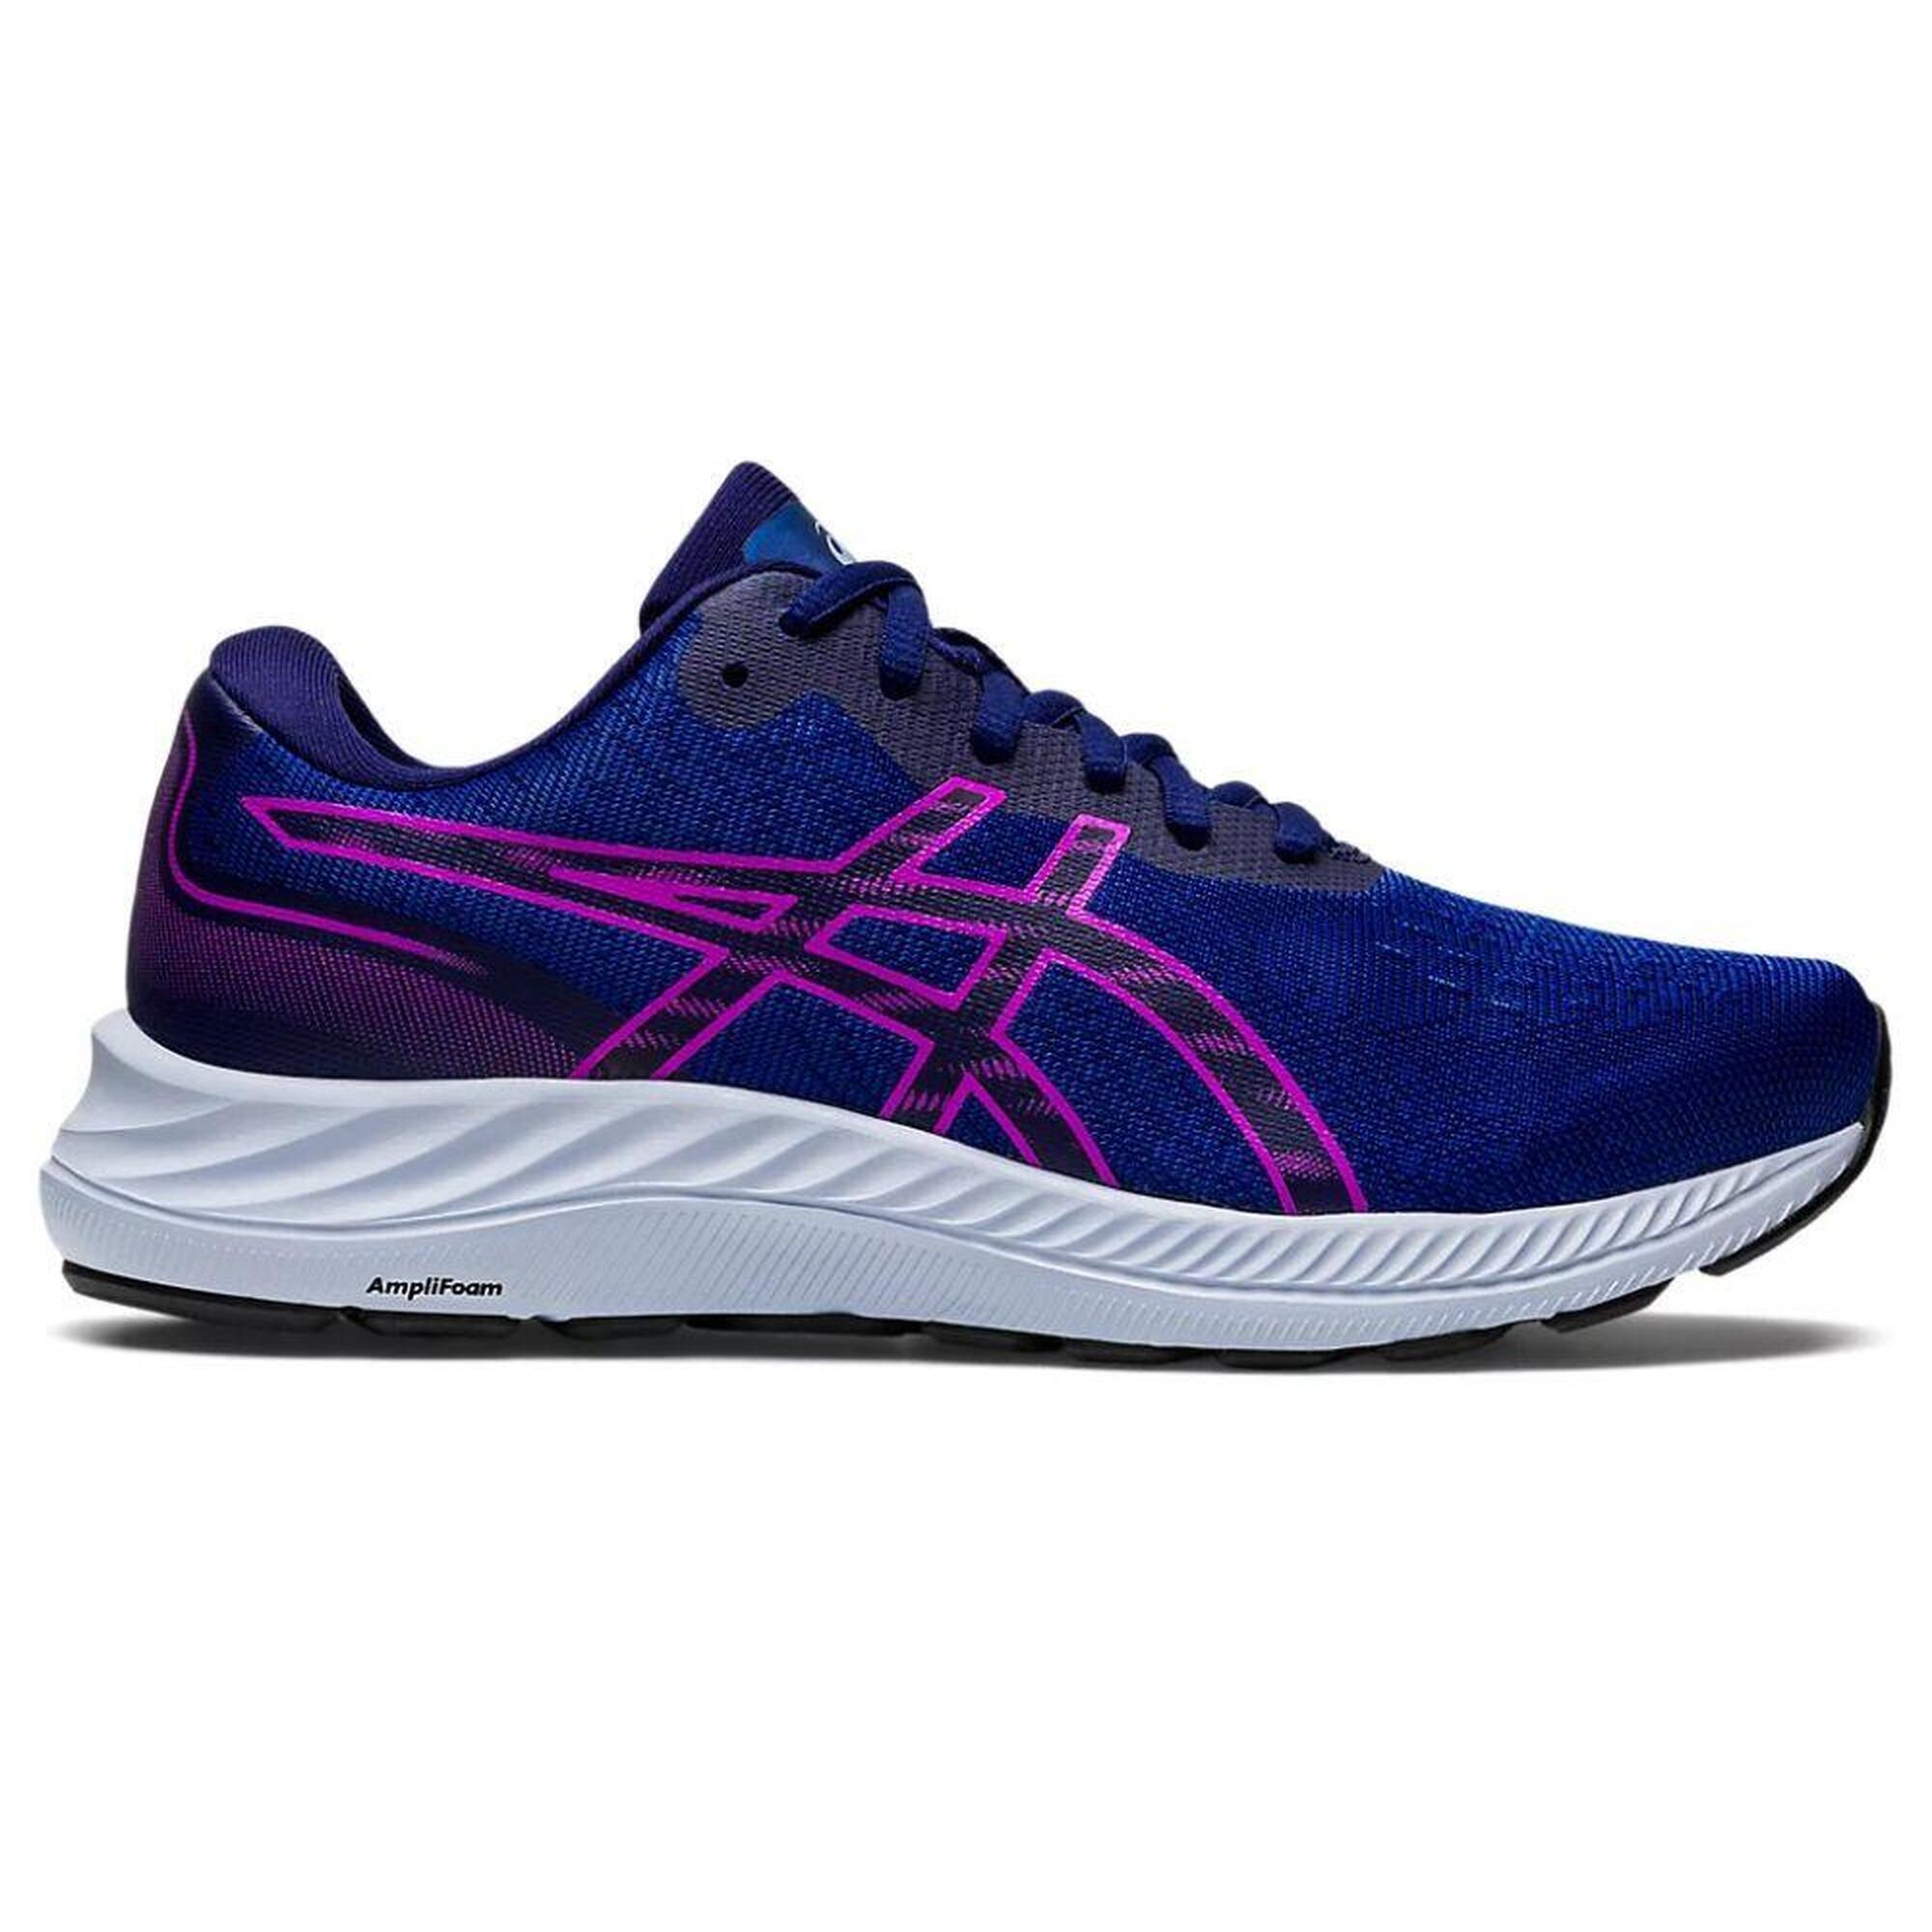 ASICS ASICS Gel-Excite 9 Womens Road Running Shoes